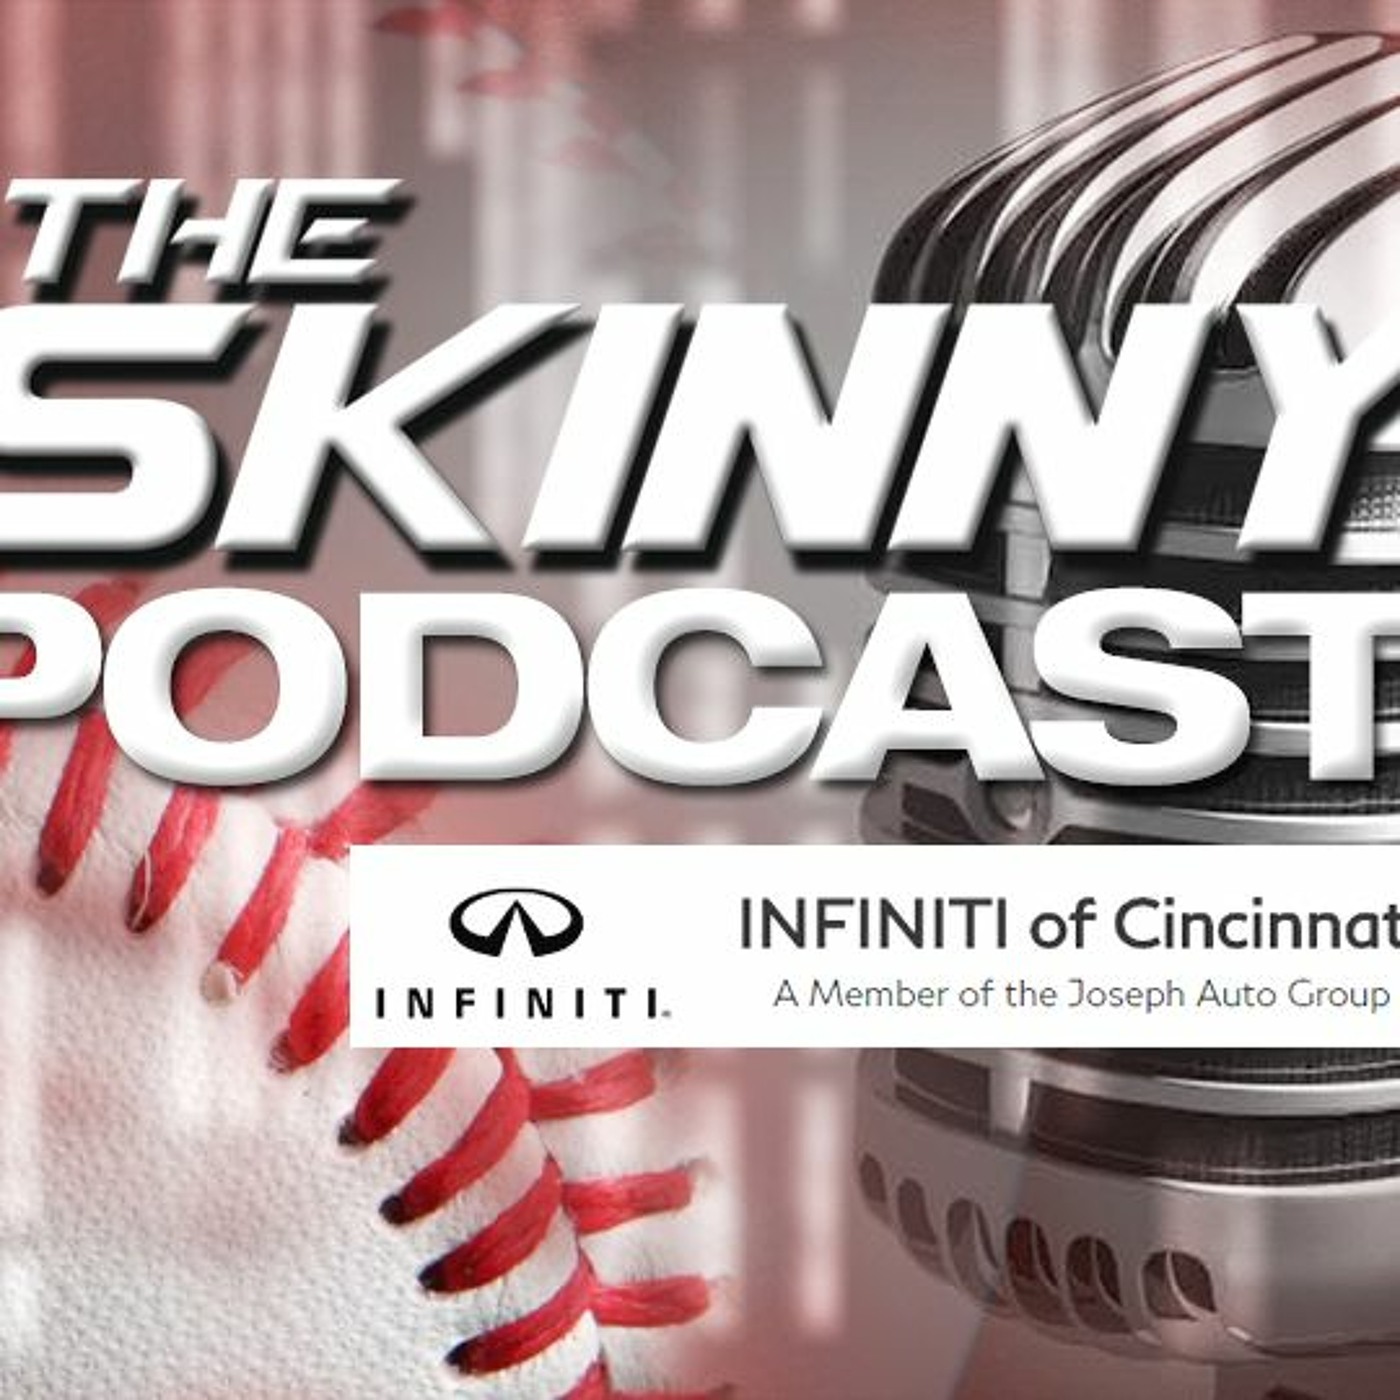 The Skinny Podcast: Reds 2018 Episode 1 (3/28/18)